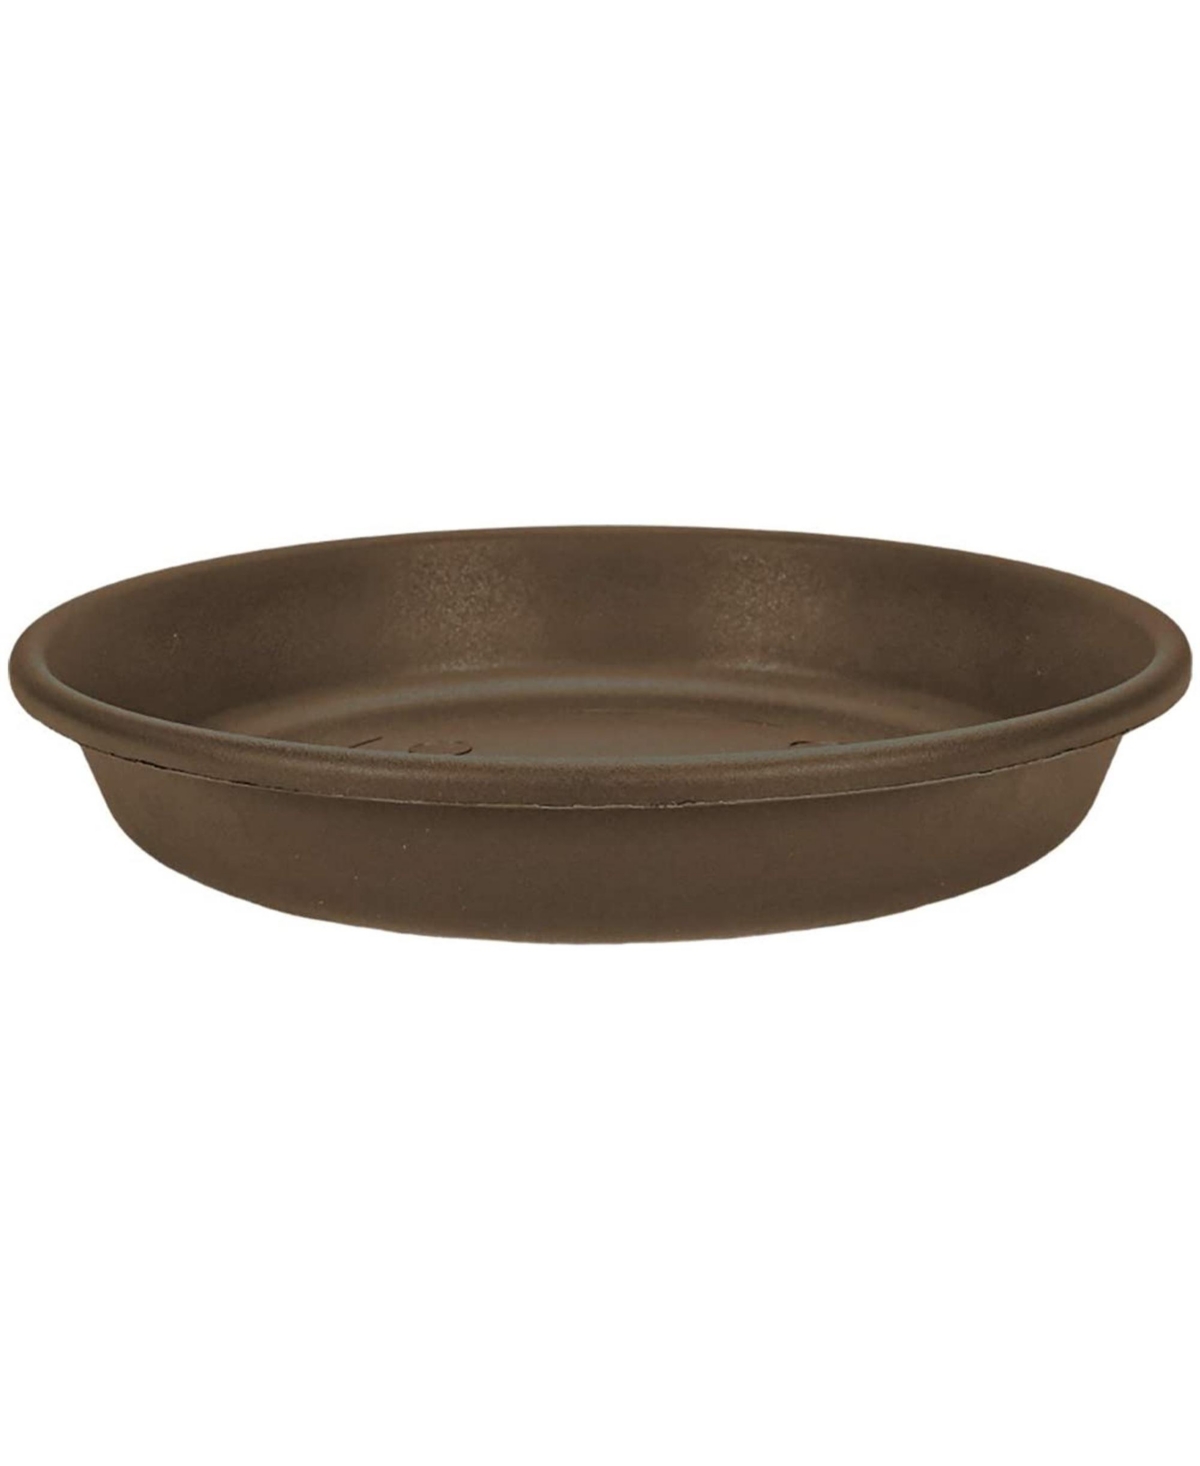 Plastic Saucer for Classic Pot, 16 - Chocolate - Brown